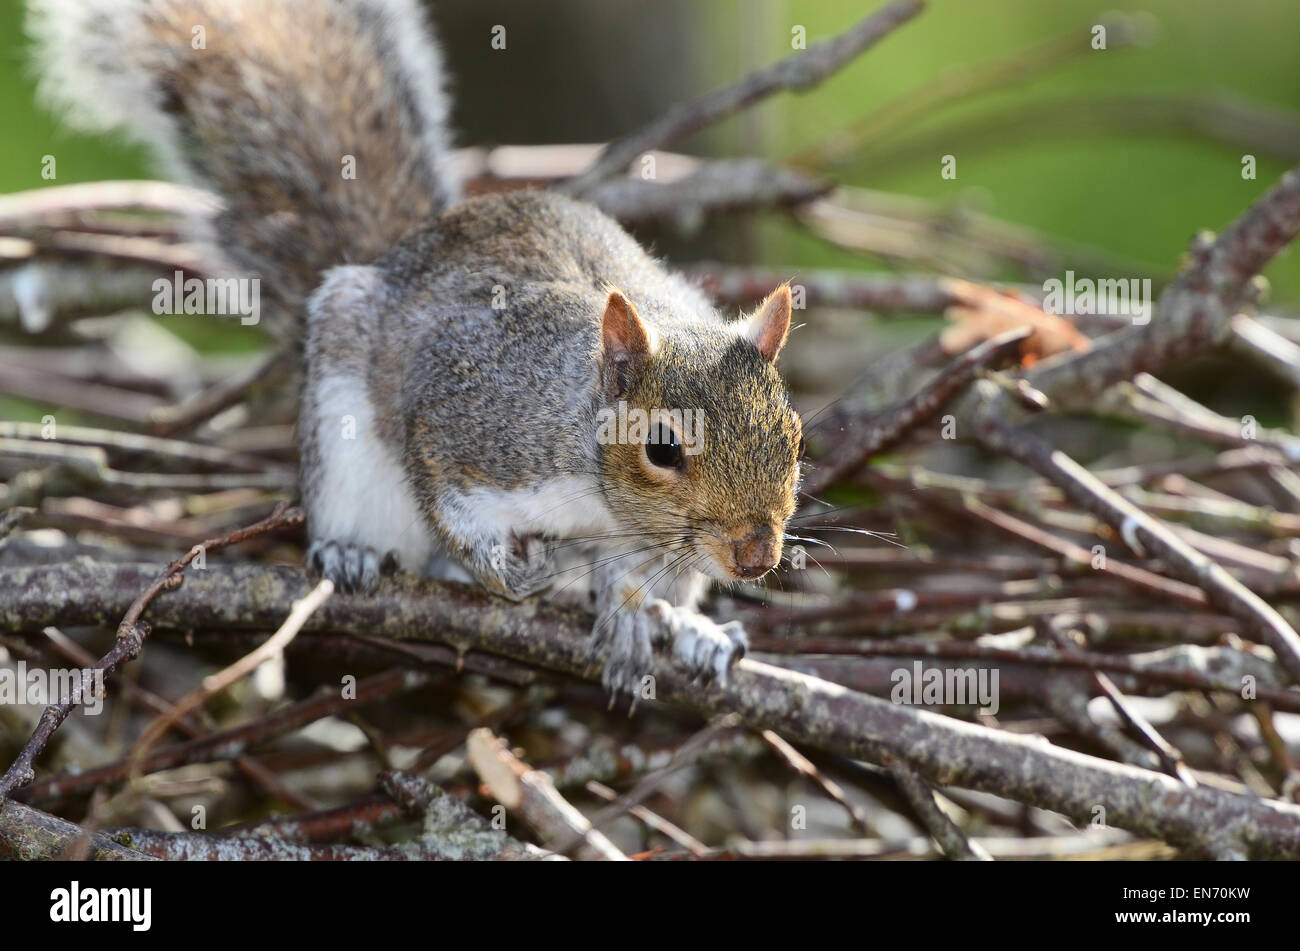 A grey squirrel on twigs UK Stock Photo